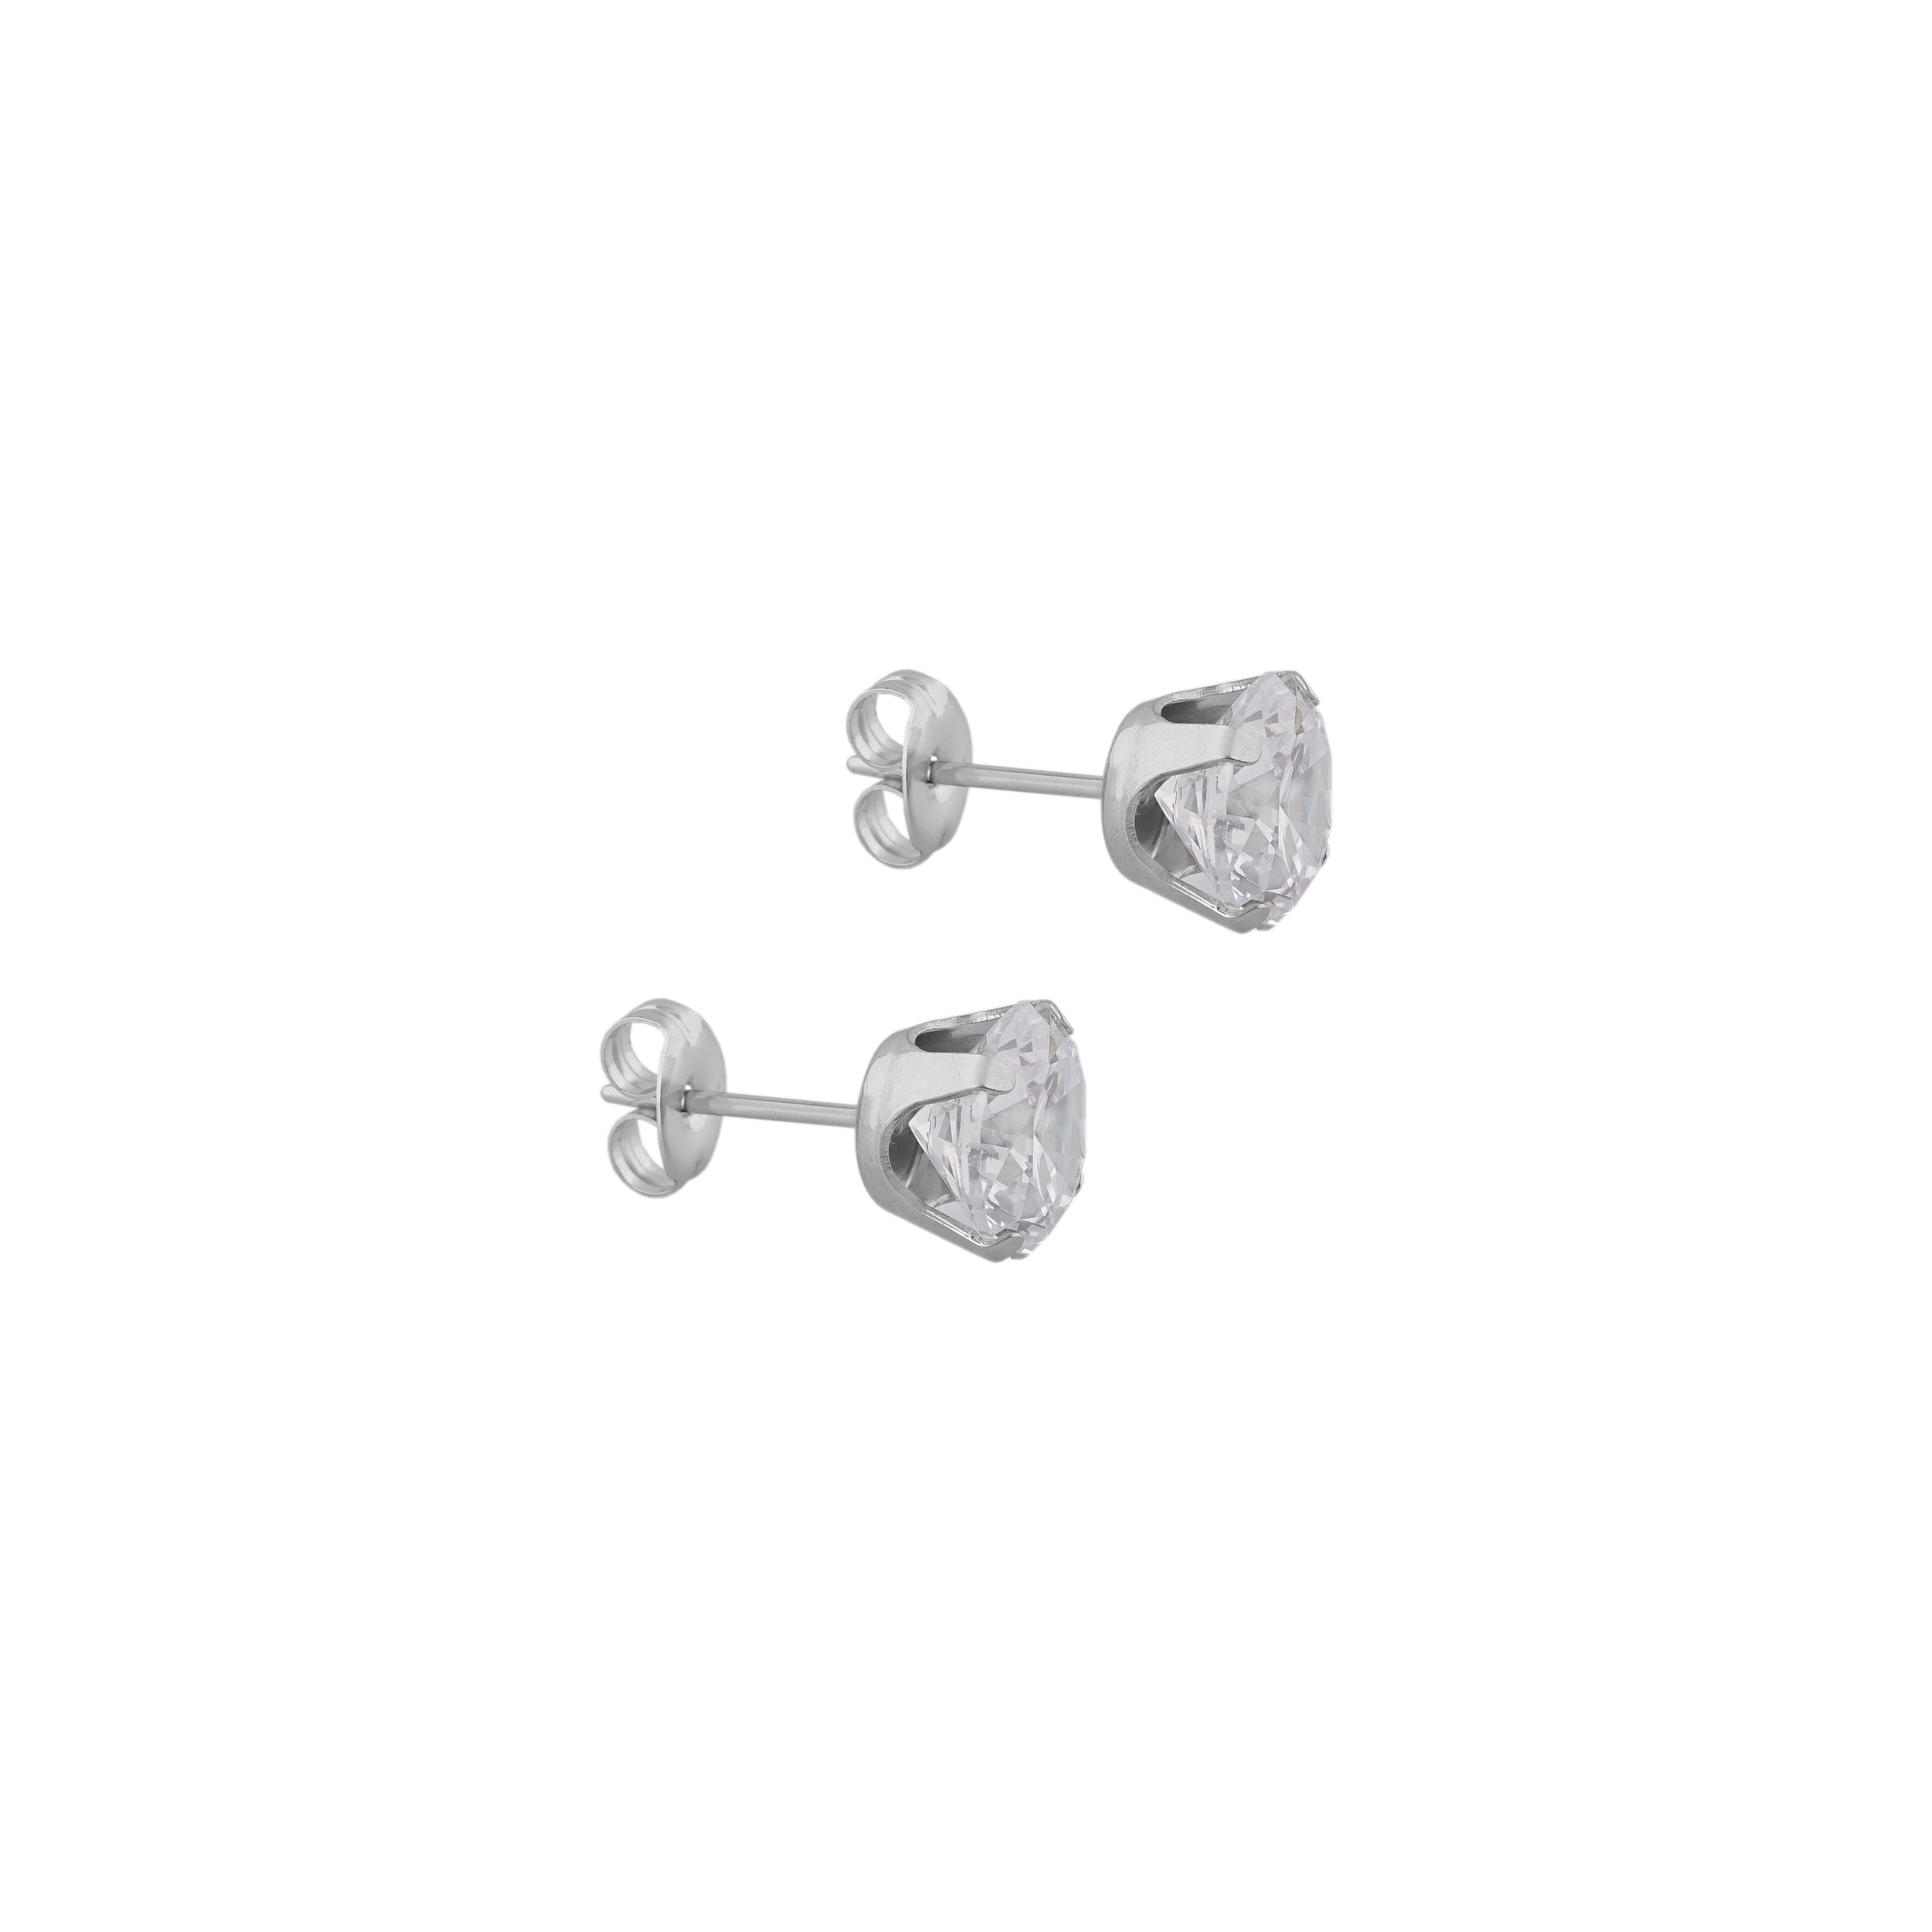 8MM Cubic Zirconia Allergy free Stainless Steel Ear Studs | MADE IN USA | Ideal for everyday wear